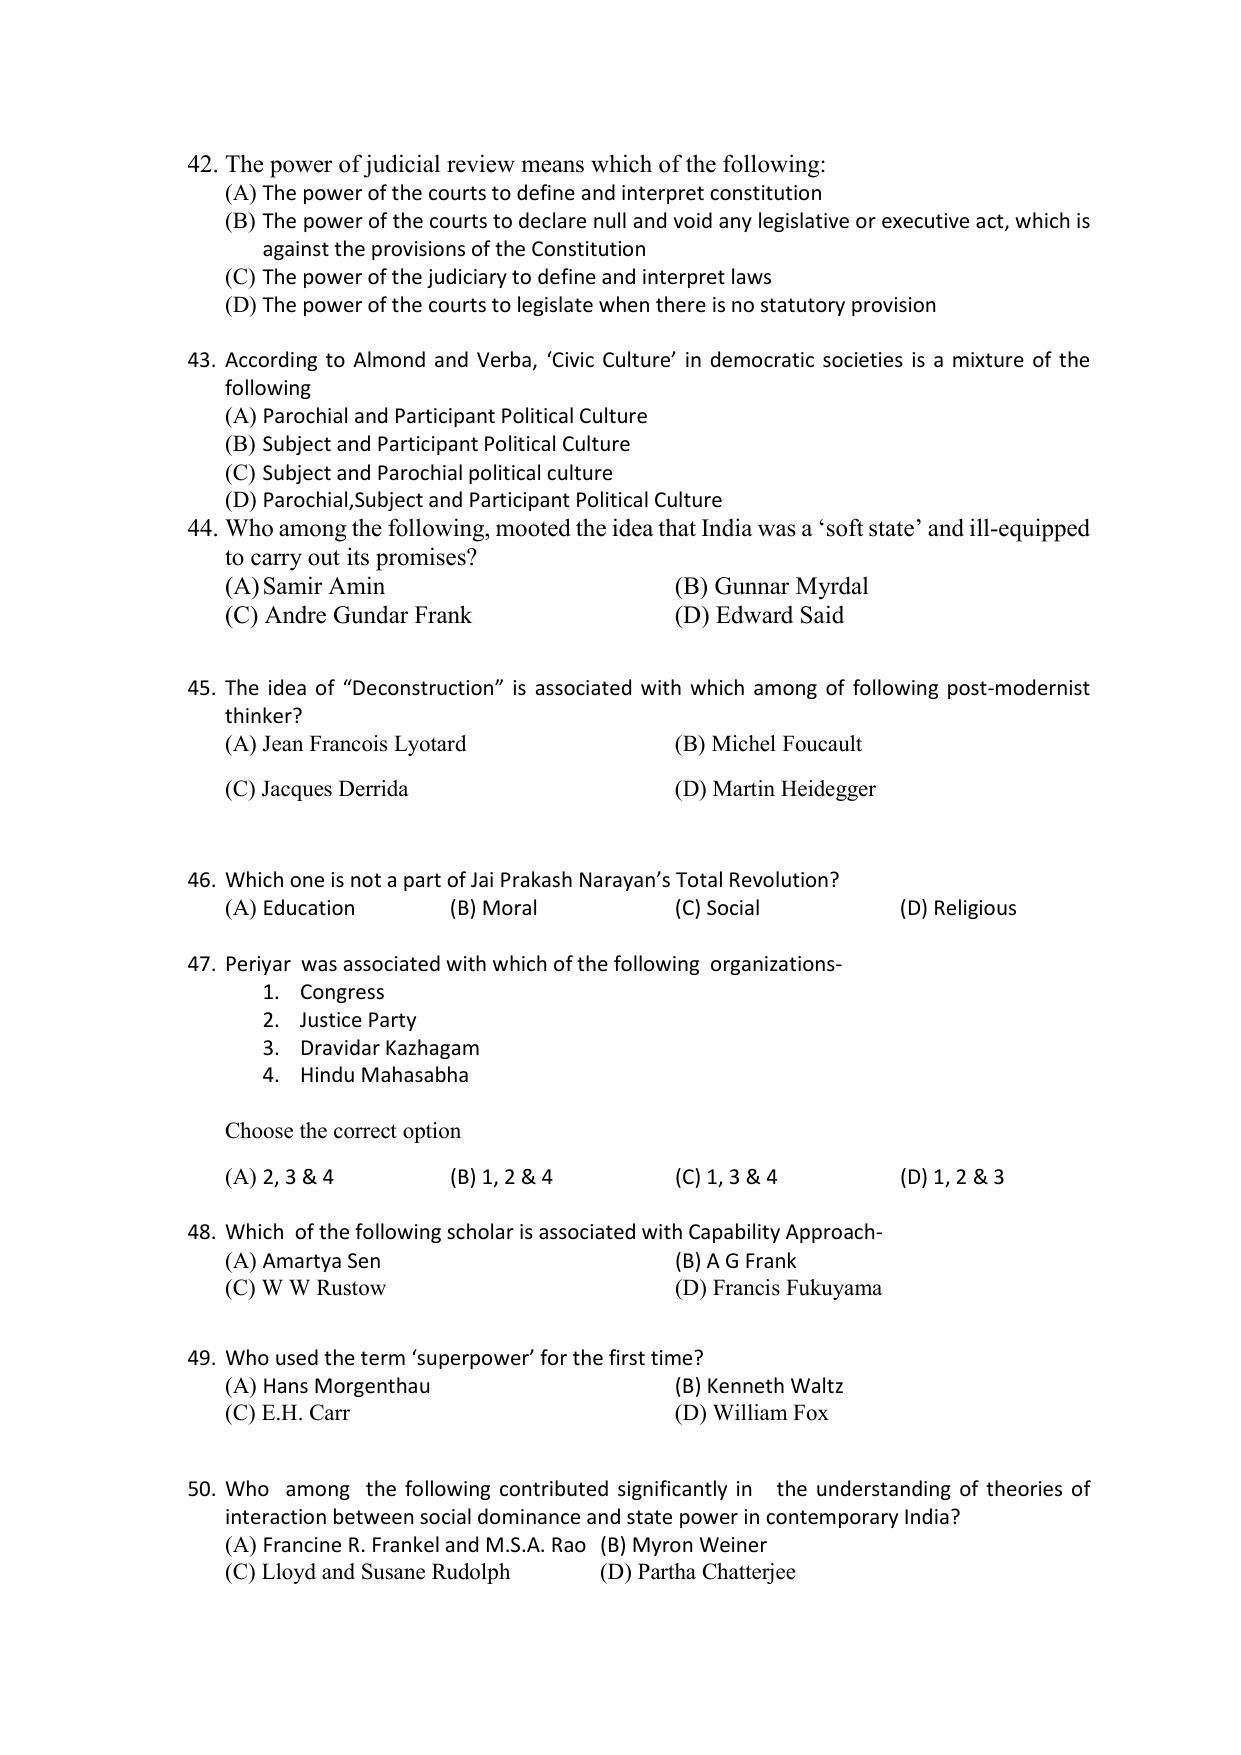 PU MPET Ancient Indian History & Archeology 2022 Question Papers - Page 31